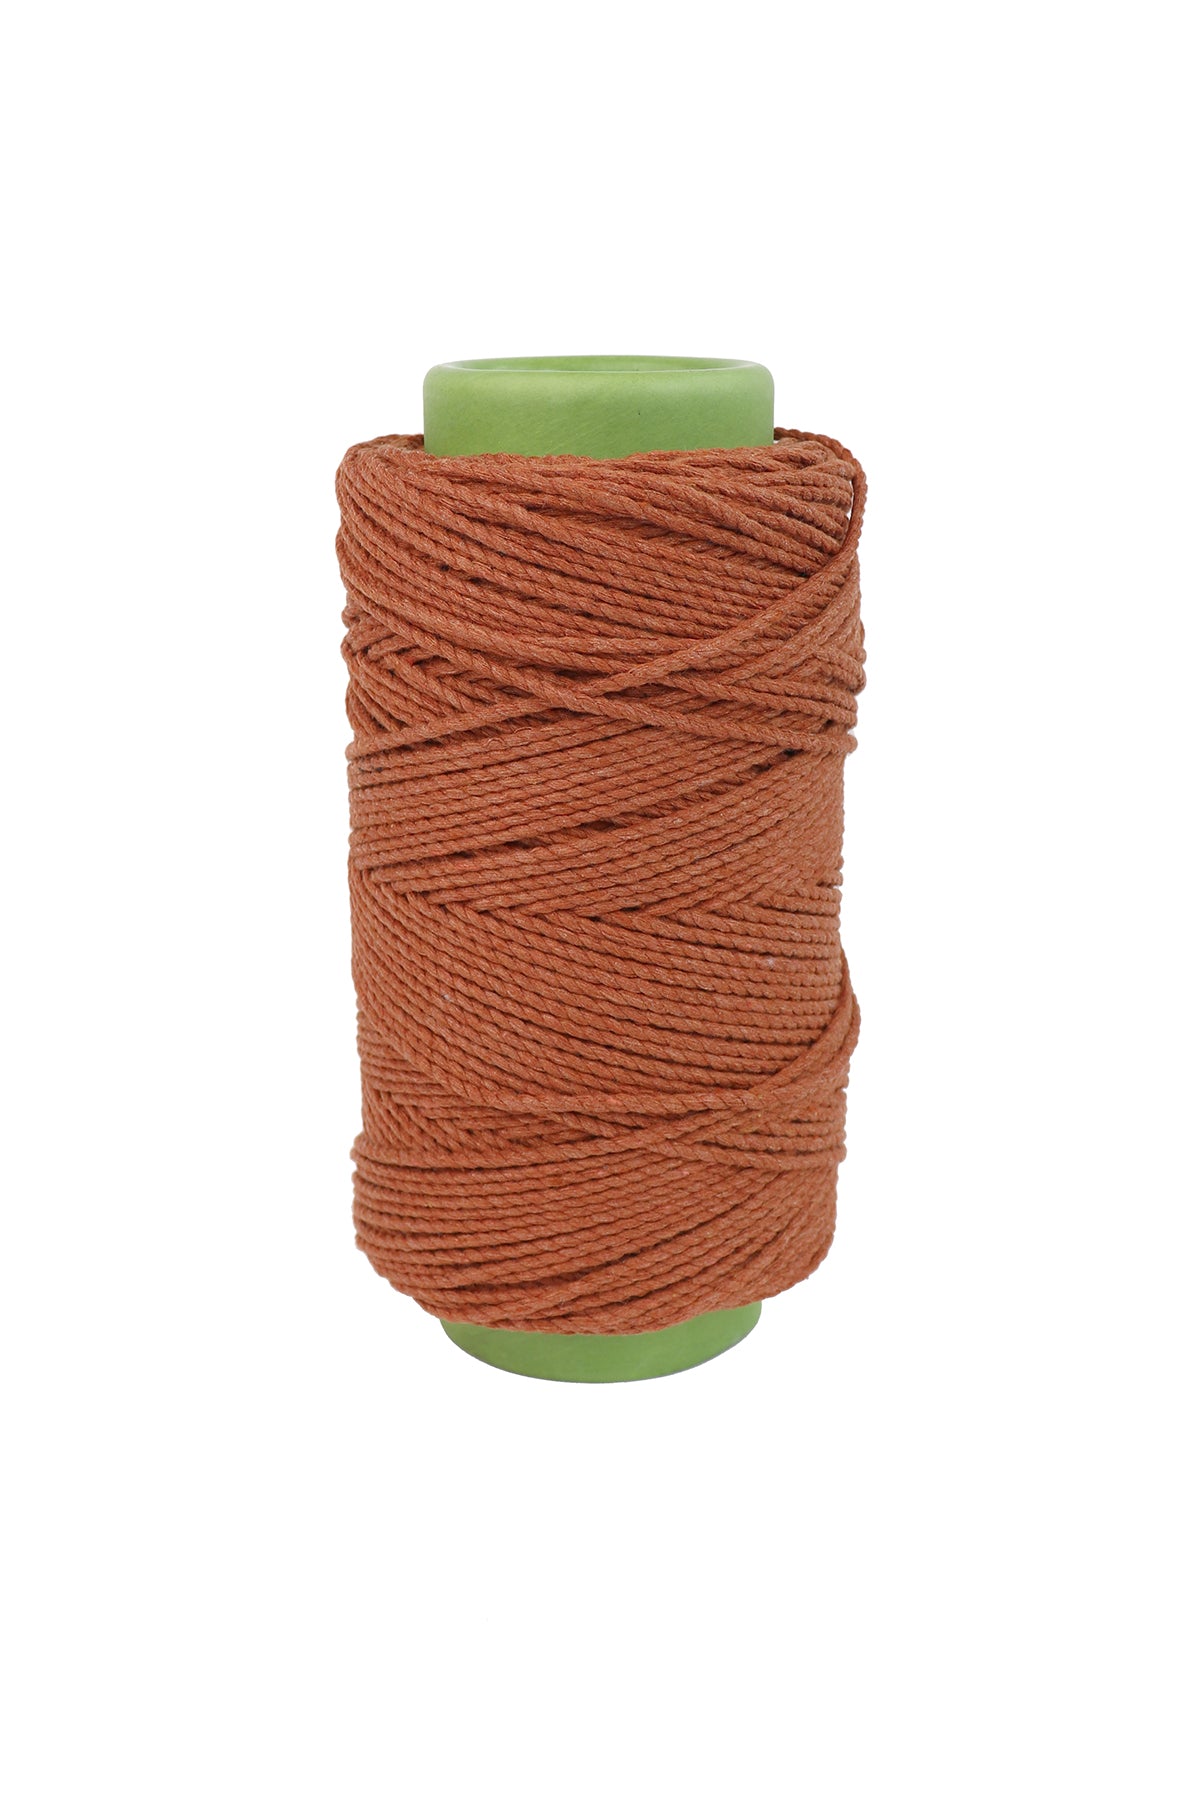 3mm 2 ply 100% cotton rope in copper